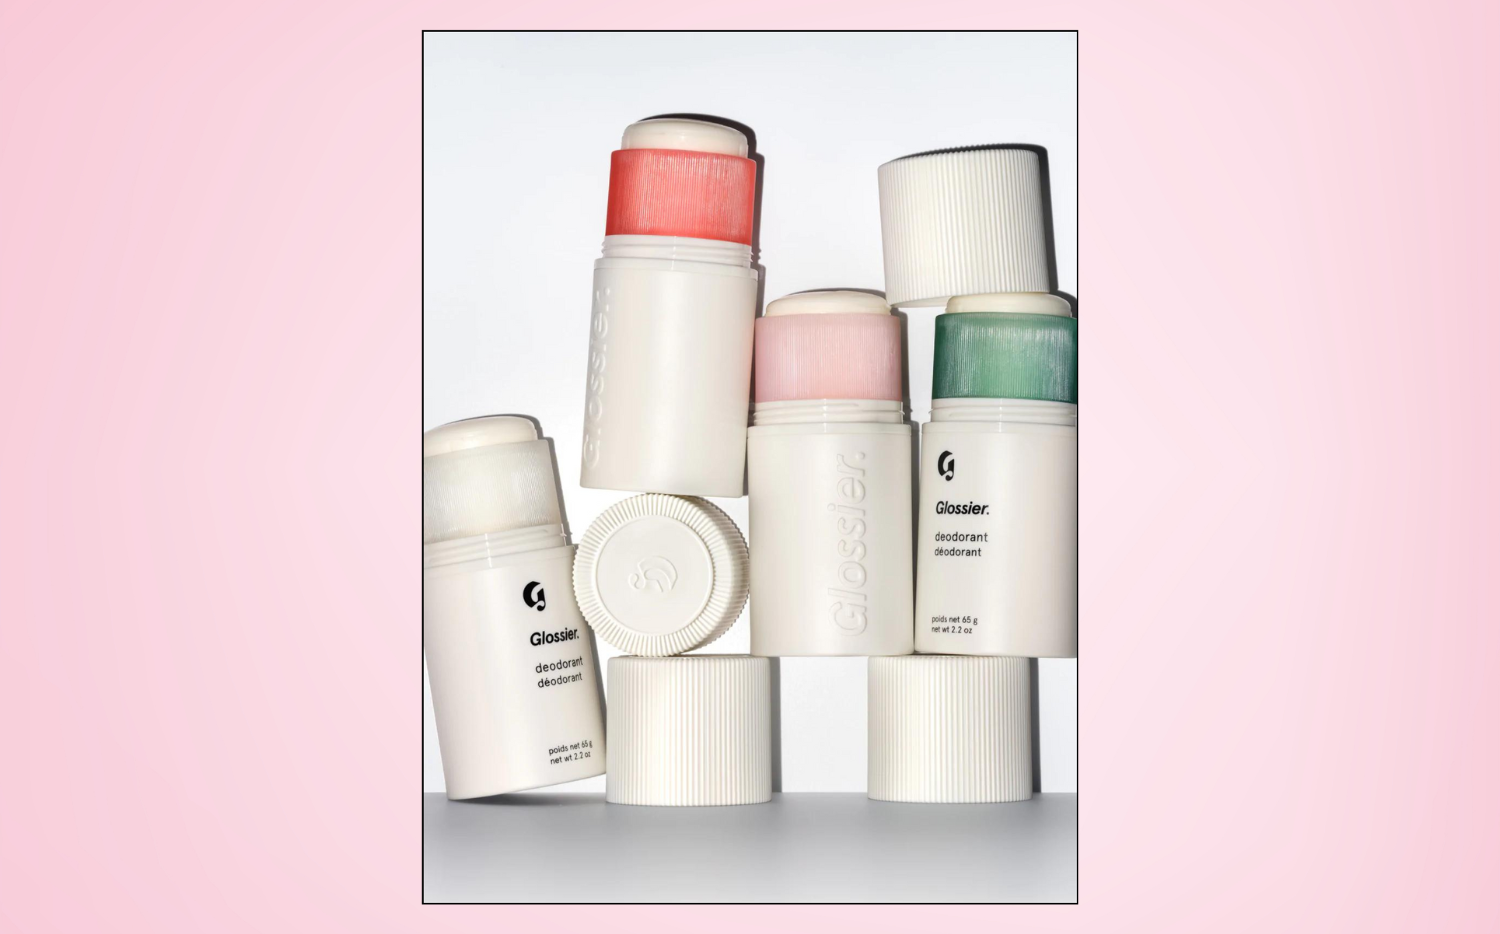 A tell-all book about Glossier is currently in the works